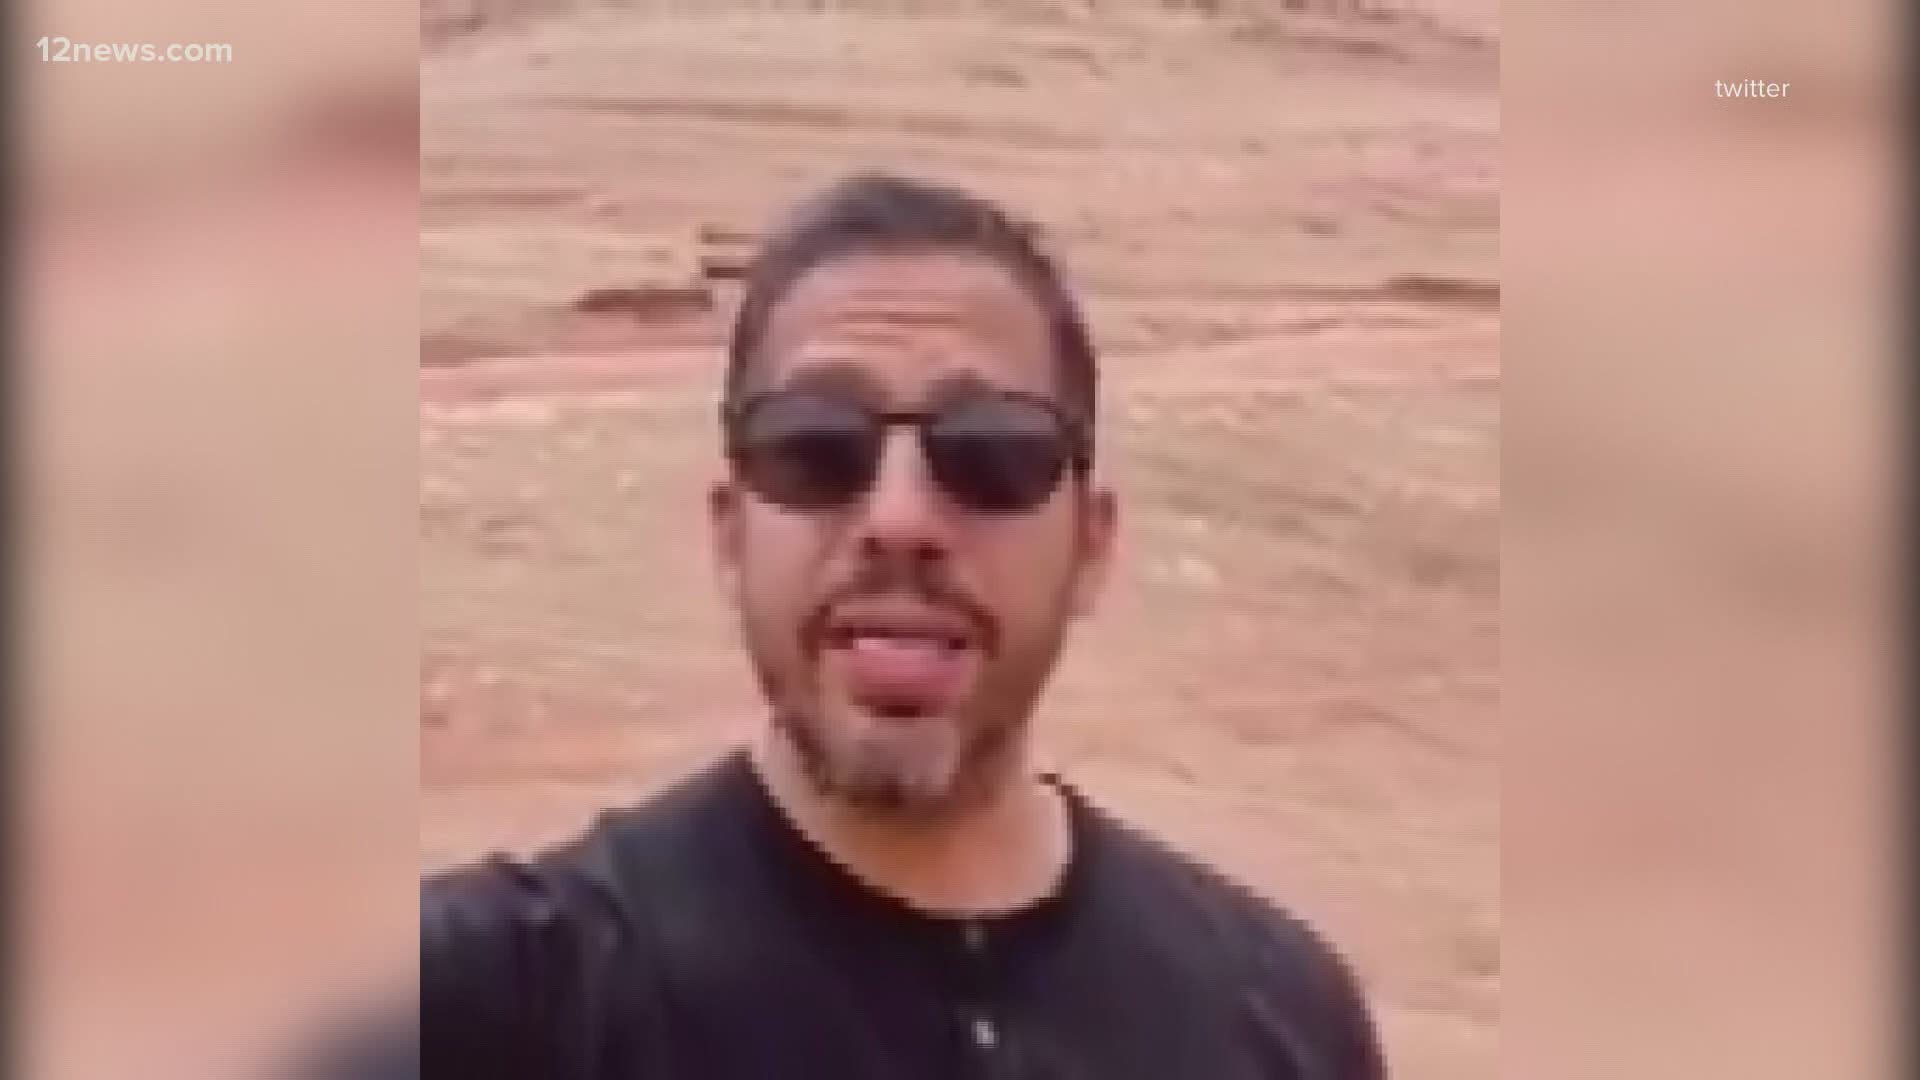 David Blaine is planning to strap himself to a bunch of helium balloons and see how high in the air he can fly.